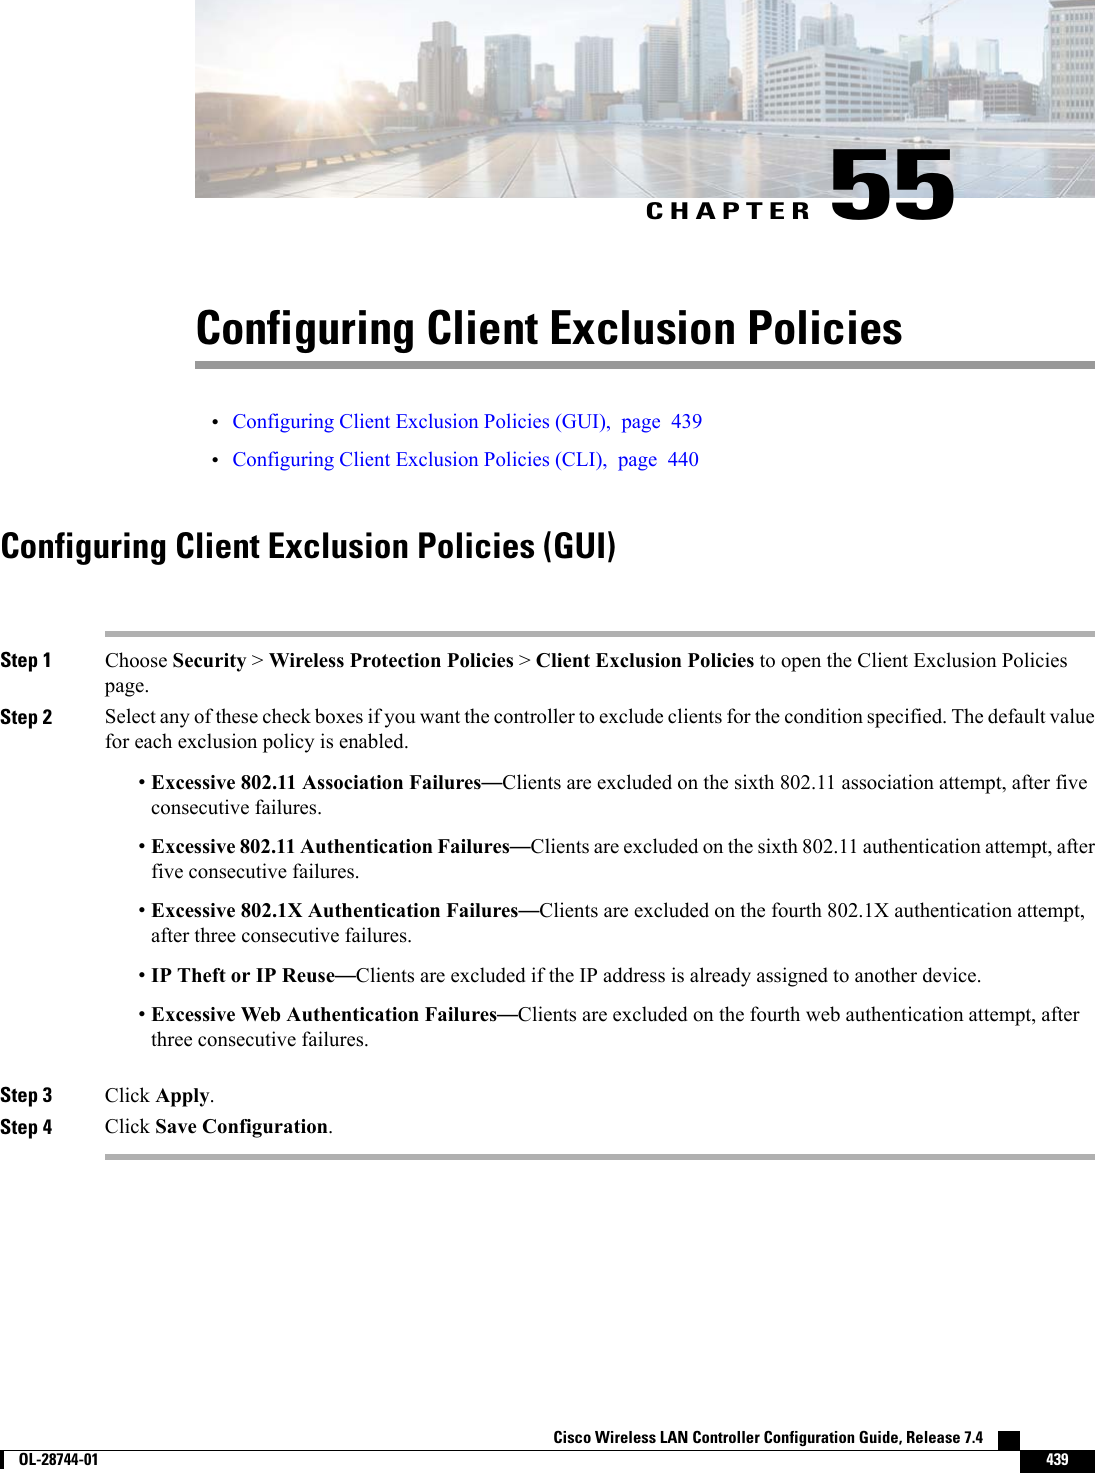 CHAPTER 55Configuring Client Exclusion Policies•Configuring Client Exclusion Policies (GUI), page 439•Configuring Client Exclusion Policies (CLI), page 440Configuring Client Exclusion Policies (GUI)Step 1 Choose Security &gt;Wireless Protection Policies &gt;Client Exclusion Policies to open the Client Exclusion Policiespage.Step 2 Select any of these check boxes if you want the controller to exclude clients for the condition specified. The default valuefor each exclusion policy is enabled.•Excessive 802.11 Association Failures—Clients are excluded on the sixth 802.11 association attempt, after fiveconsecutive failures.•Excessive 802.11 Authentication Failures—Clients are excluded on the sixth 802.11 authentication attempt, afterfive consecutive failures.•Excessive 802.1X Authentication Failures—Clients are excluded on the fourth 802.1X authentication attempt,after three consecutive failures.•IP Theft or IP Reuse—Clients are excluded if the IP address is already assigned to another device.•Excessive Web Authentication Failures—Clients are excluded on the fourth web authentication attempt, afterthree consecutive failures.Step 3 Click Apply.Step 4 Click Save Configuration.Cisco Wireless LAN Controller Configuration Guide, Release 7.4        OL-28744-01 439